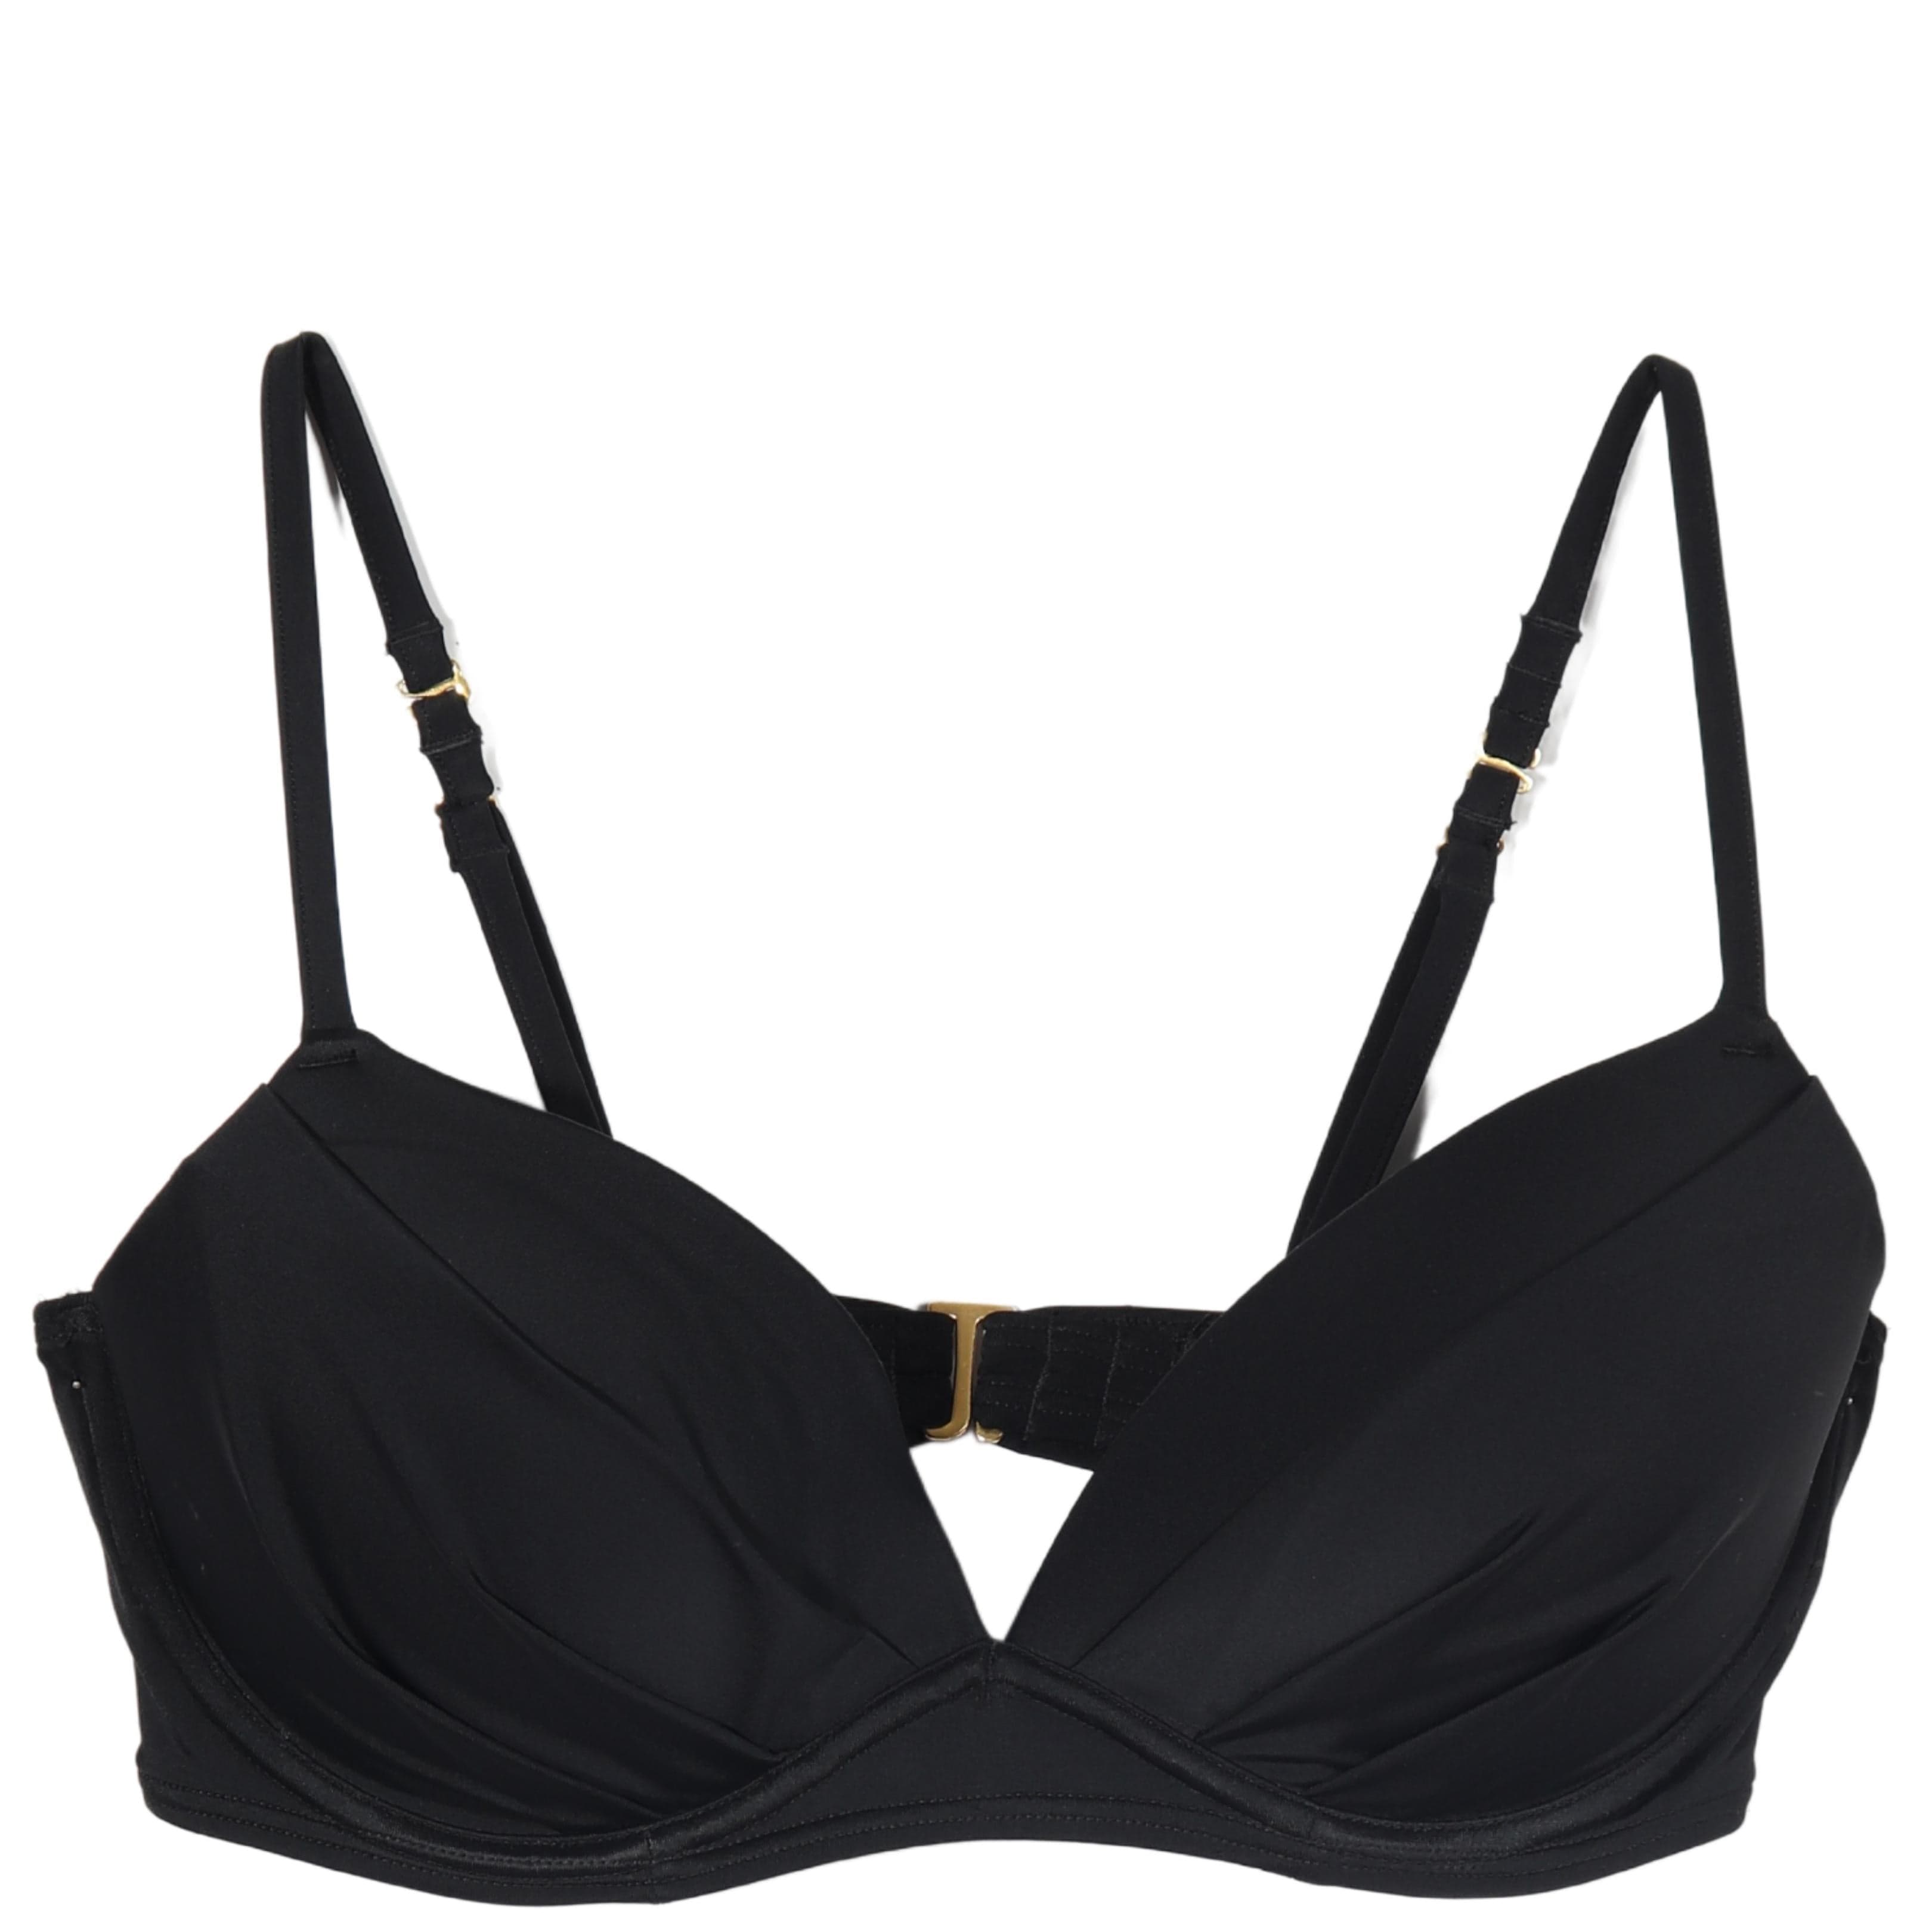 Smart & Sexy Bras in Smart & Sexy